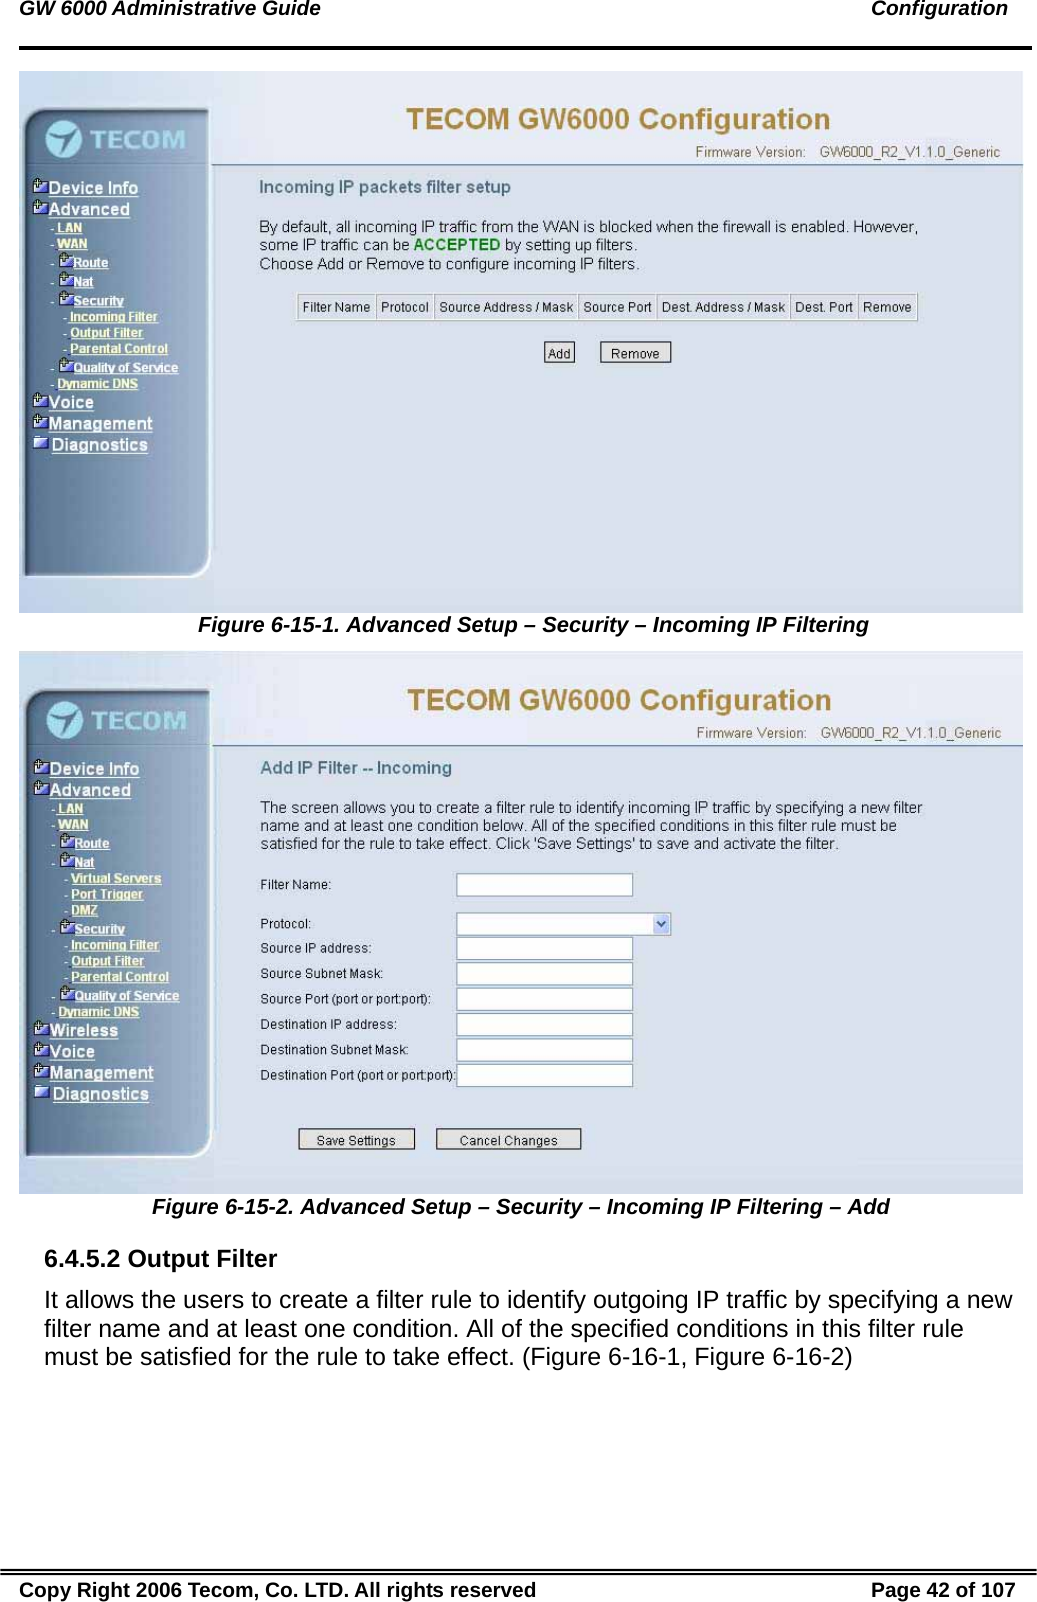 GW 6000 Administrative Guide                                                                                               Configuration  Figure 6-15-1. Advanced Setup – Security – Incoming IP Filtering  Figure 6-15-2. Advanced Setup – Security – Incoming IP Filtering – Add 6.4.5.2 Output Filter It allows the users to create a filter rule to identify outgoing IP traffic by specifying a new filter name and at least one condition. All of the specified conditions in this filter rule must be satisfied for the rule to take effect. (Figure 6-16-1, Figure 6-16-2) Copy Right 2006 Tecom, Co. LTD. All rights reserved  Page 42 of 107 